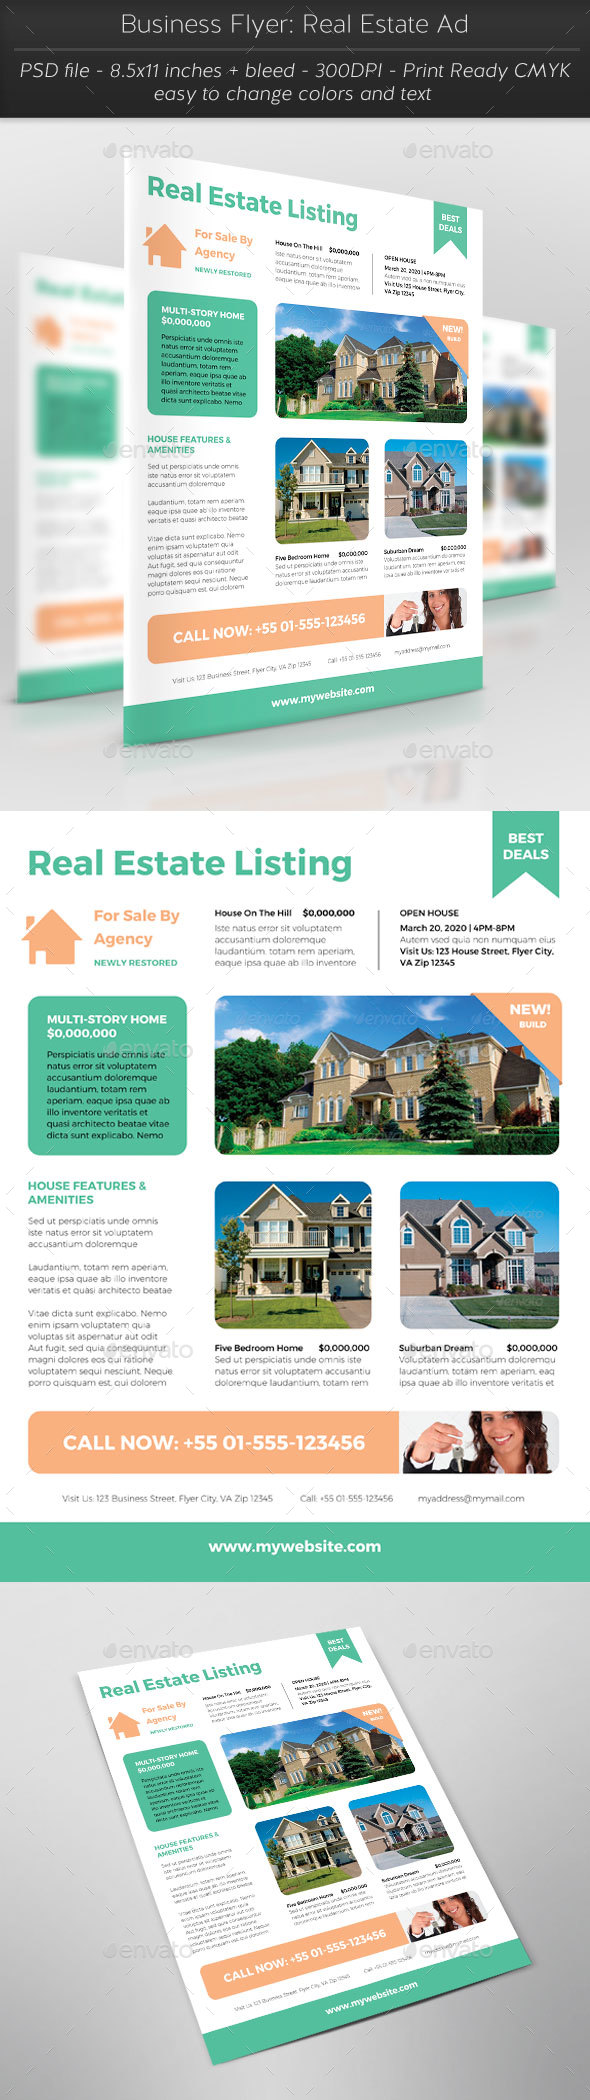 Business Flyer: Real Estate Ad